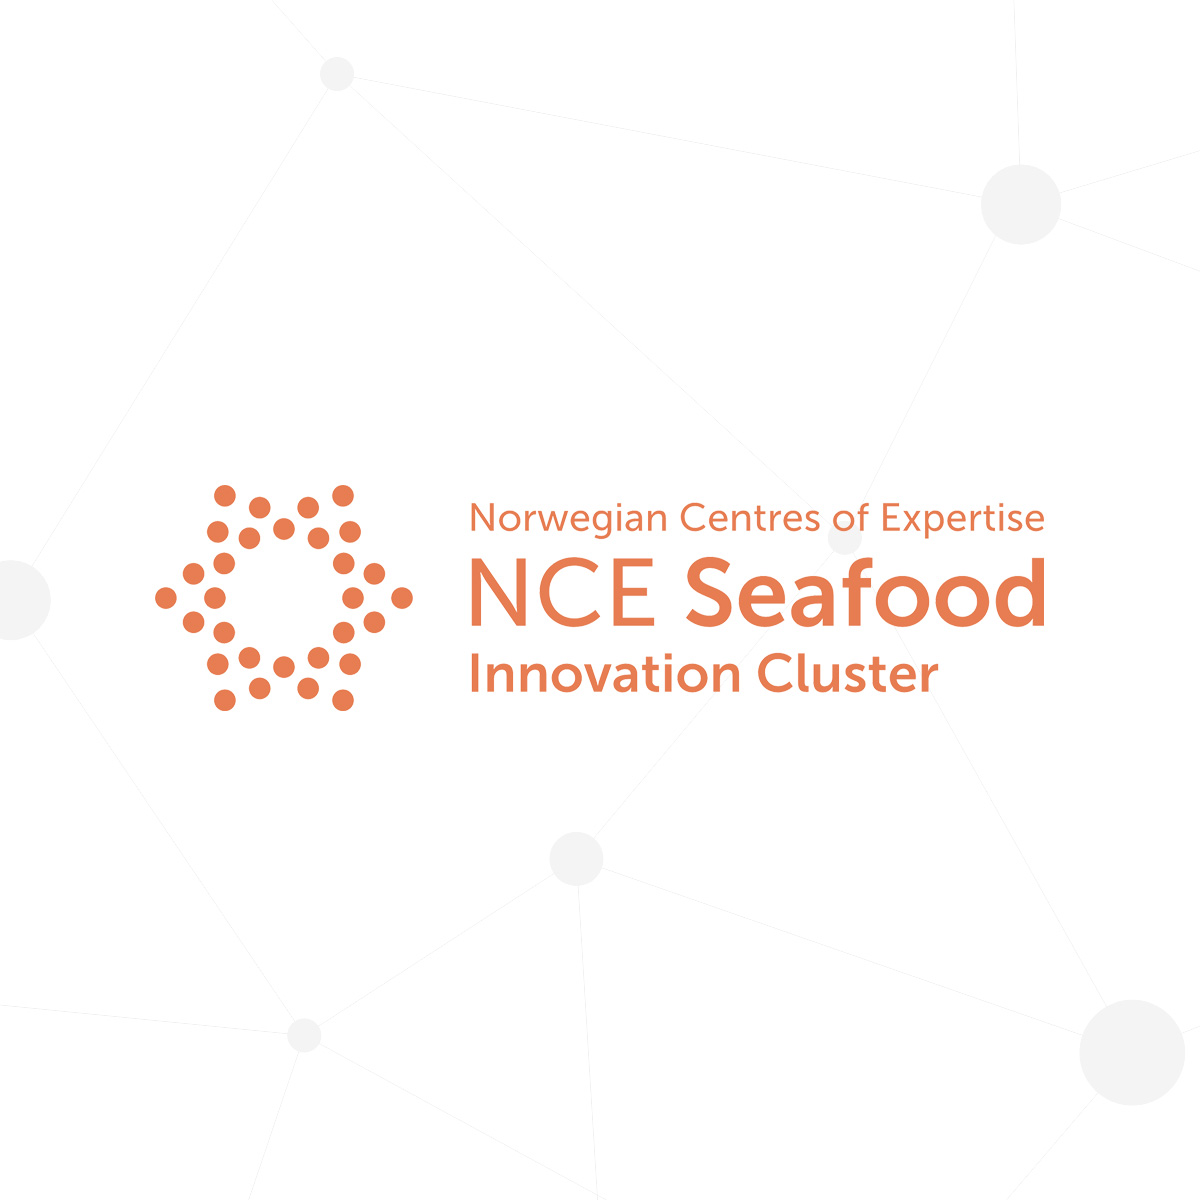 Nce Seafood Innovation Mobilizes Industry Innovation